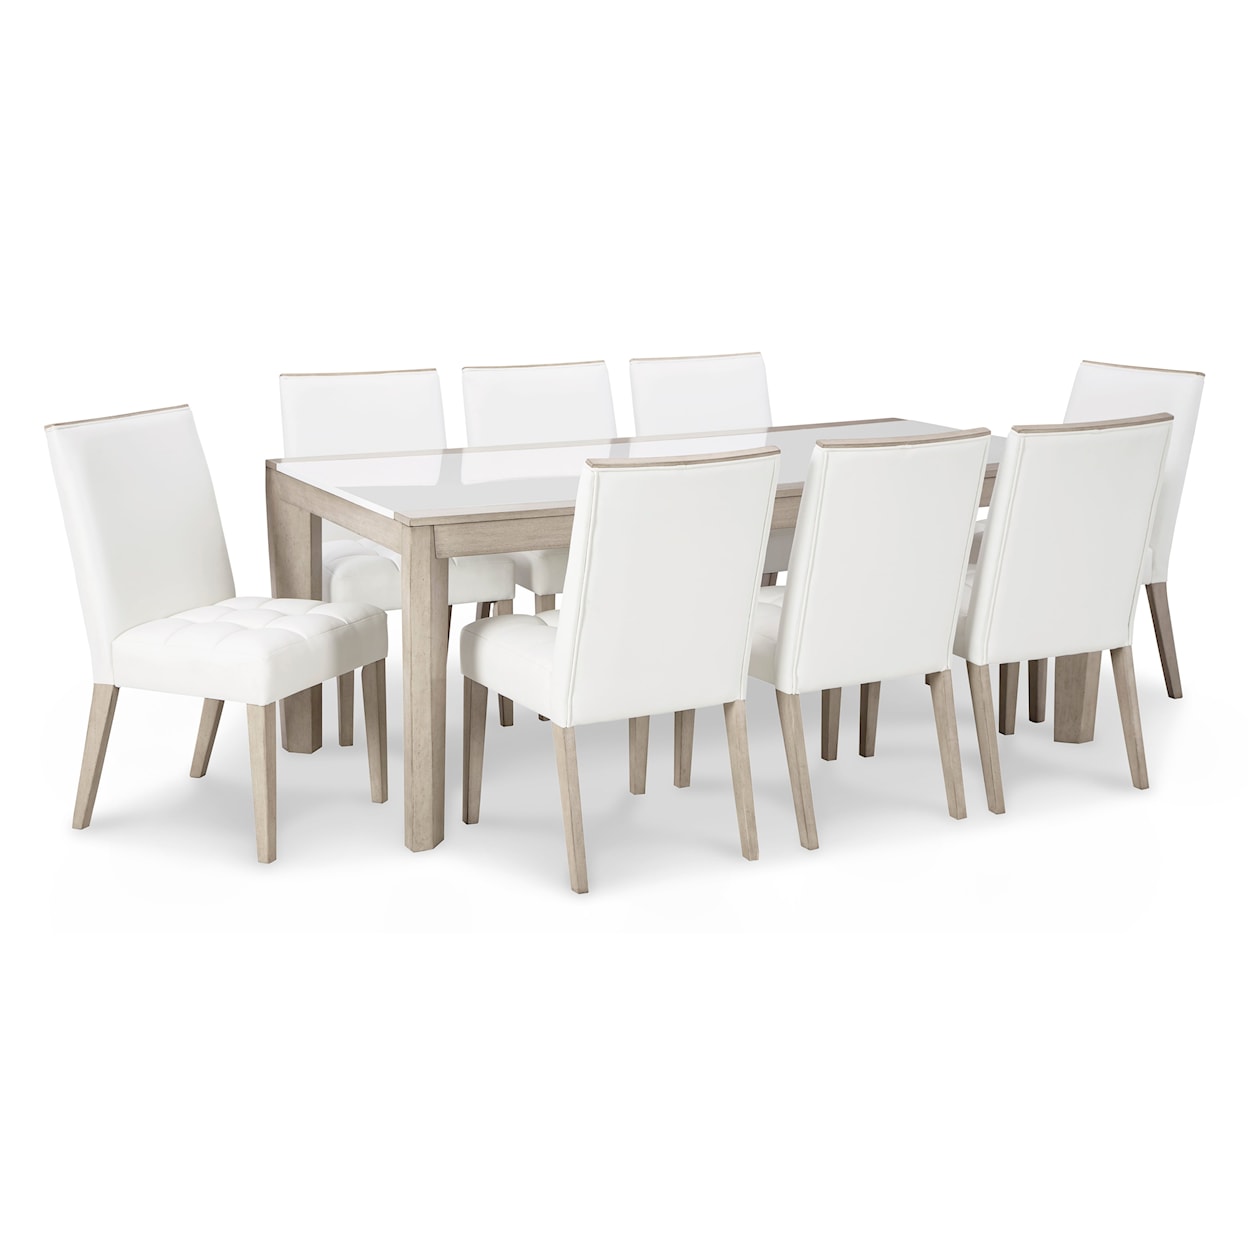 Signature Design Wendora Table and 8 Chair Dining Set